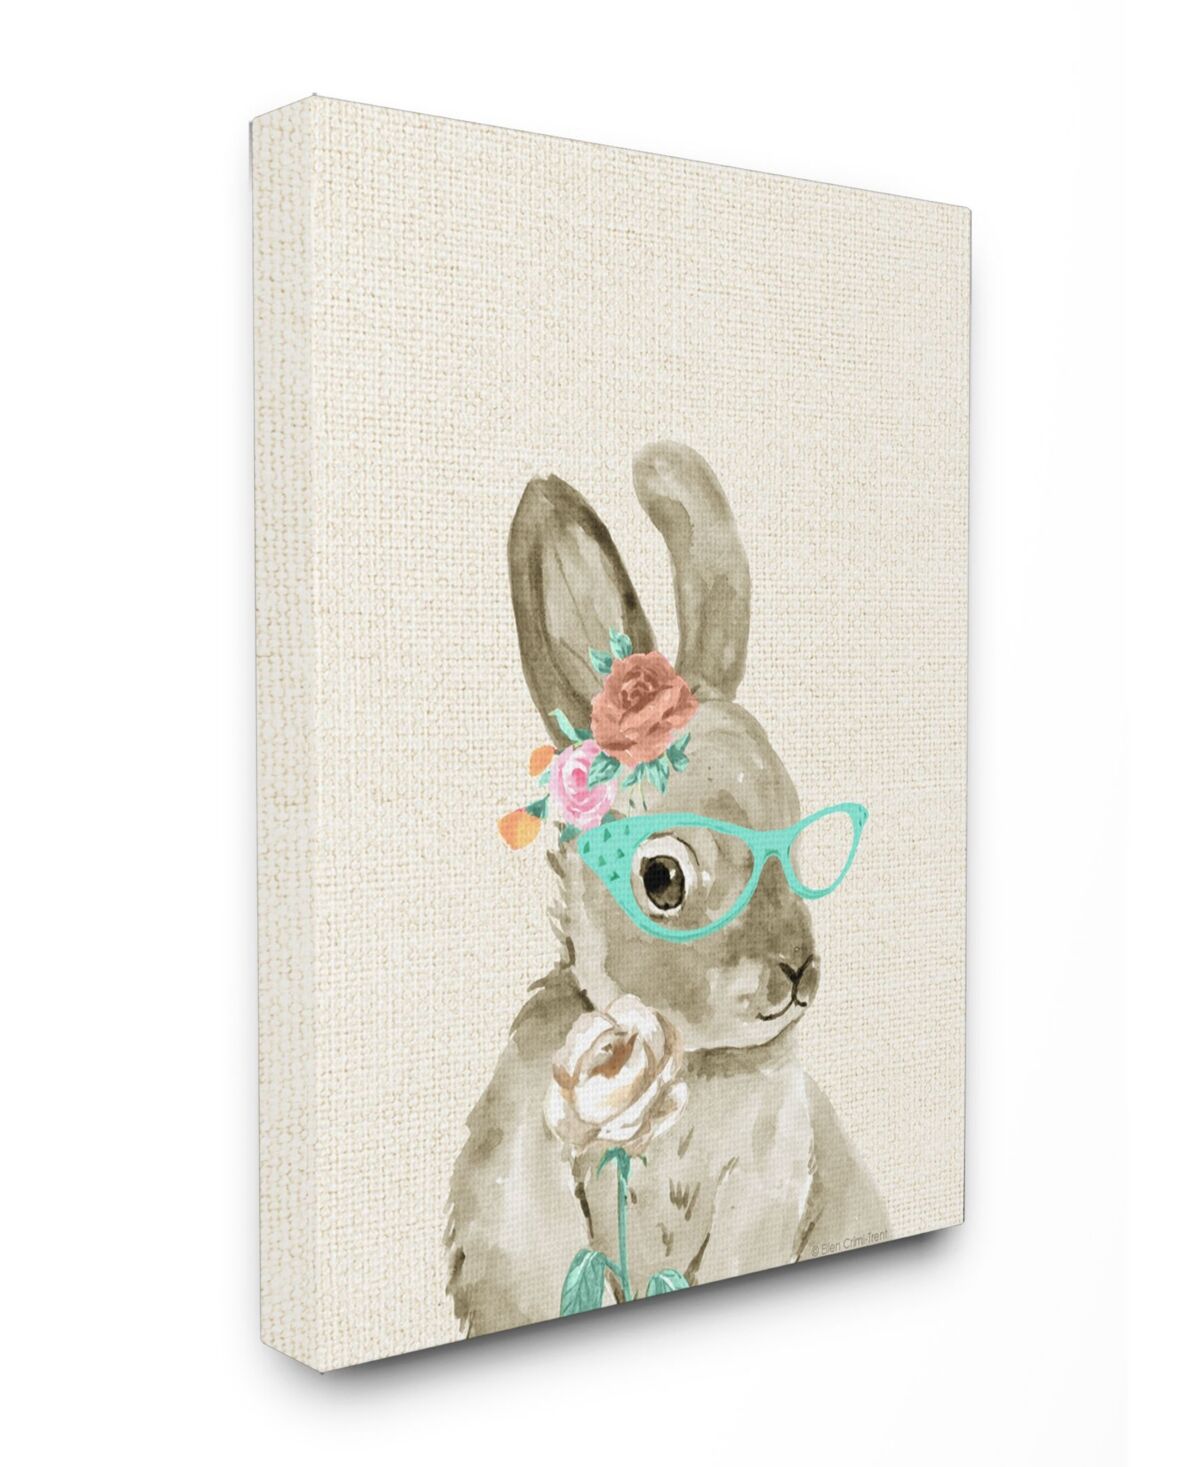 Stupell Industries Woodland Bunny with Cat Eye Glasses Canvas Wall Art, 30